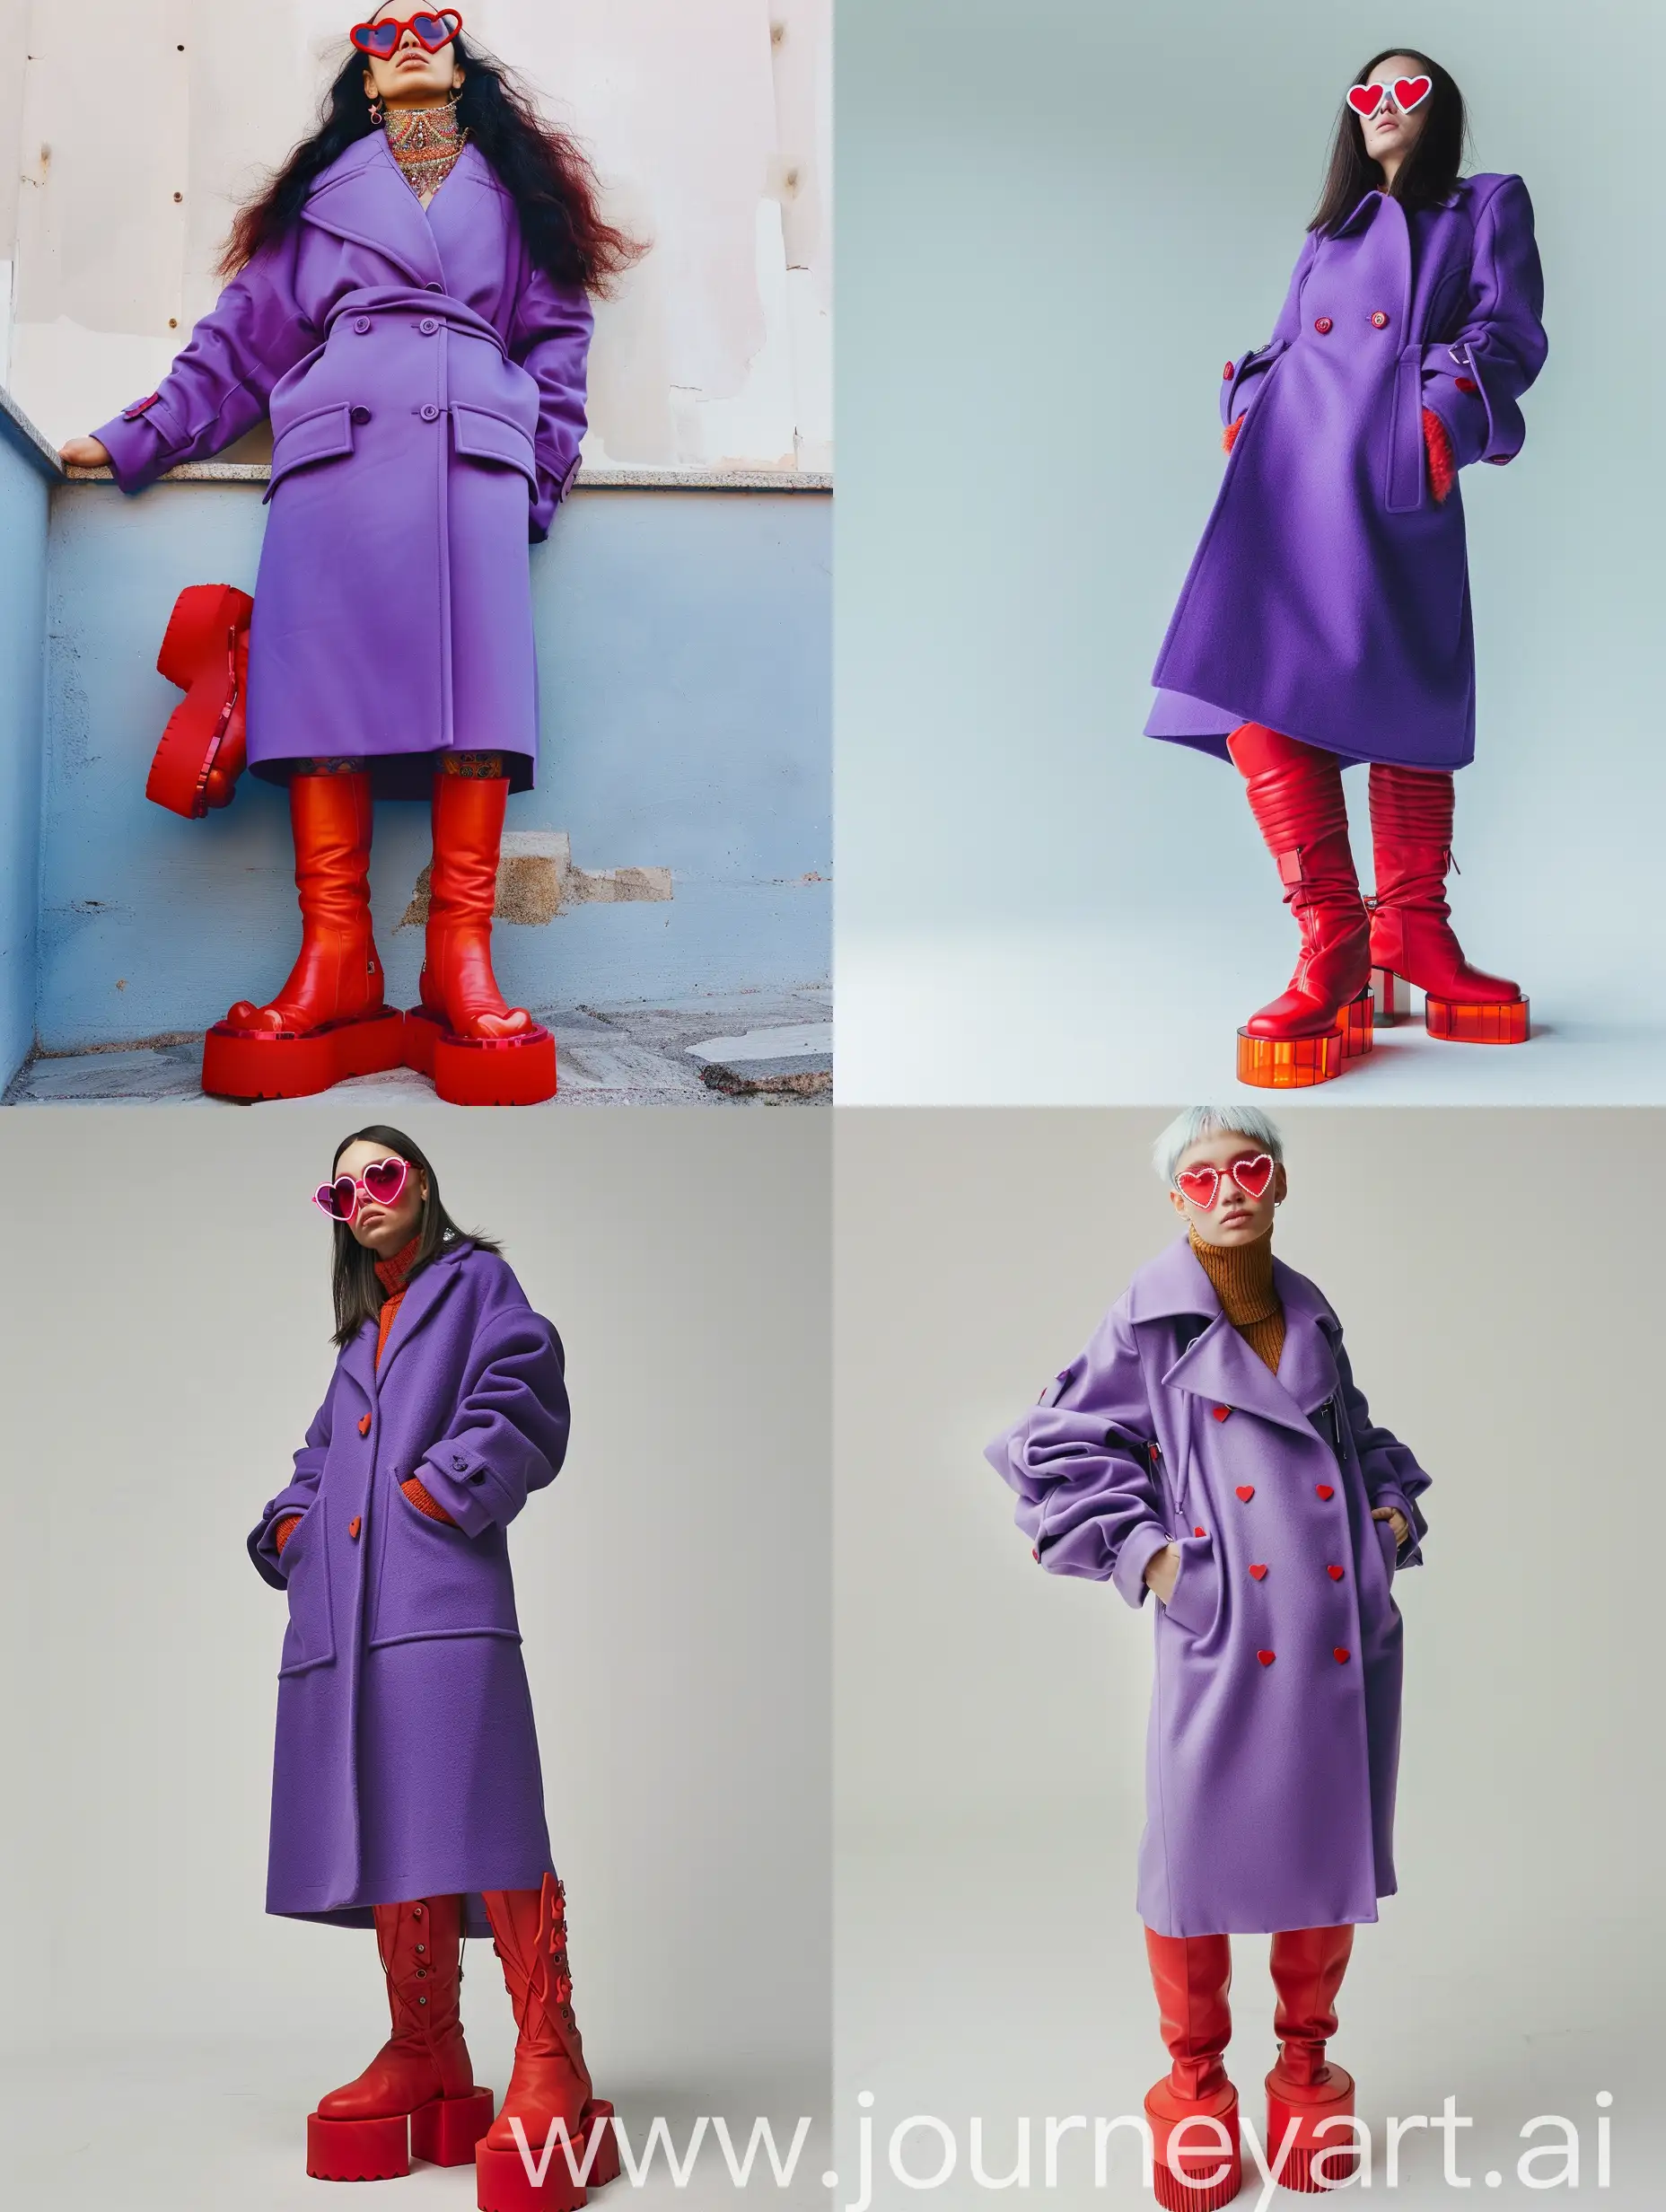 Stylish-Slavic-Woman-in-Purple-Coat-and-Red-Platform-Boots-with-HeartShaped-Glasses